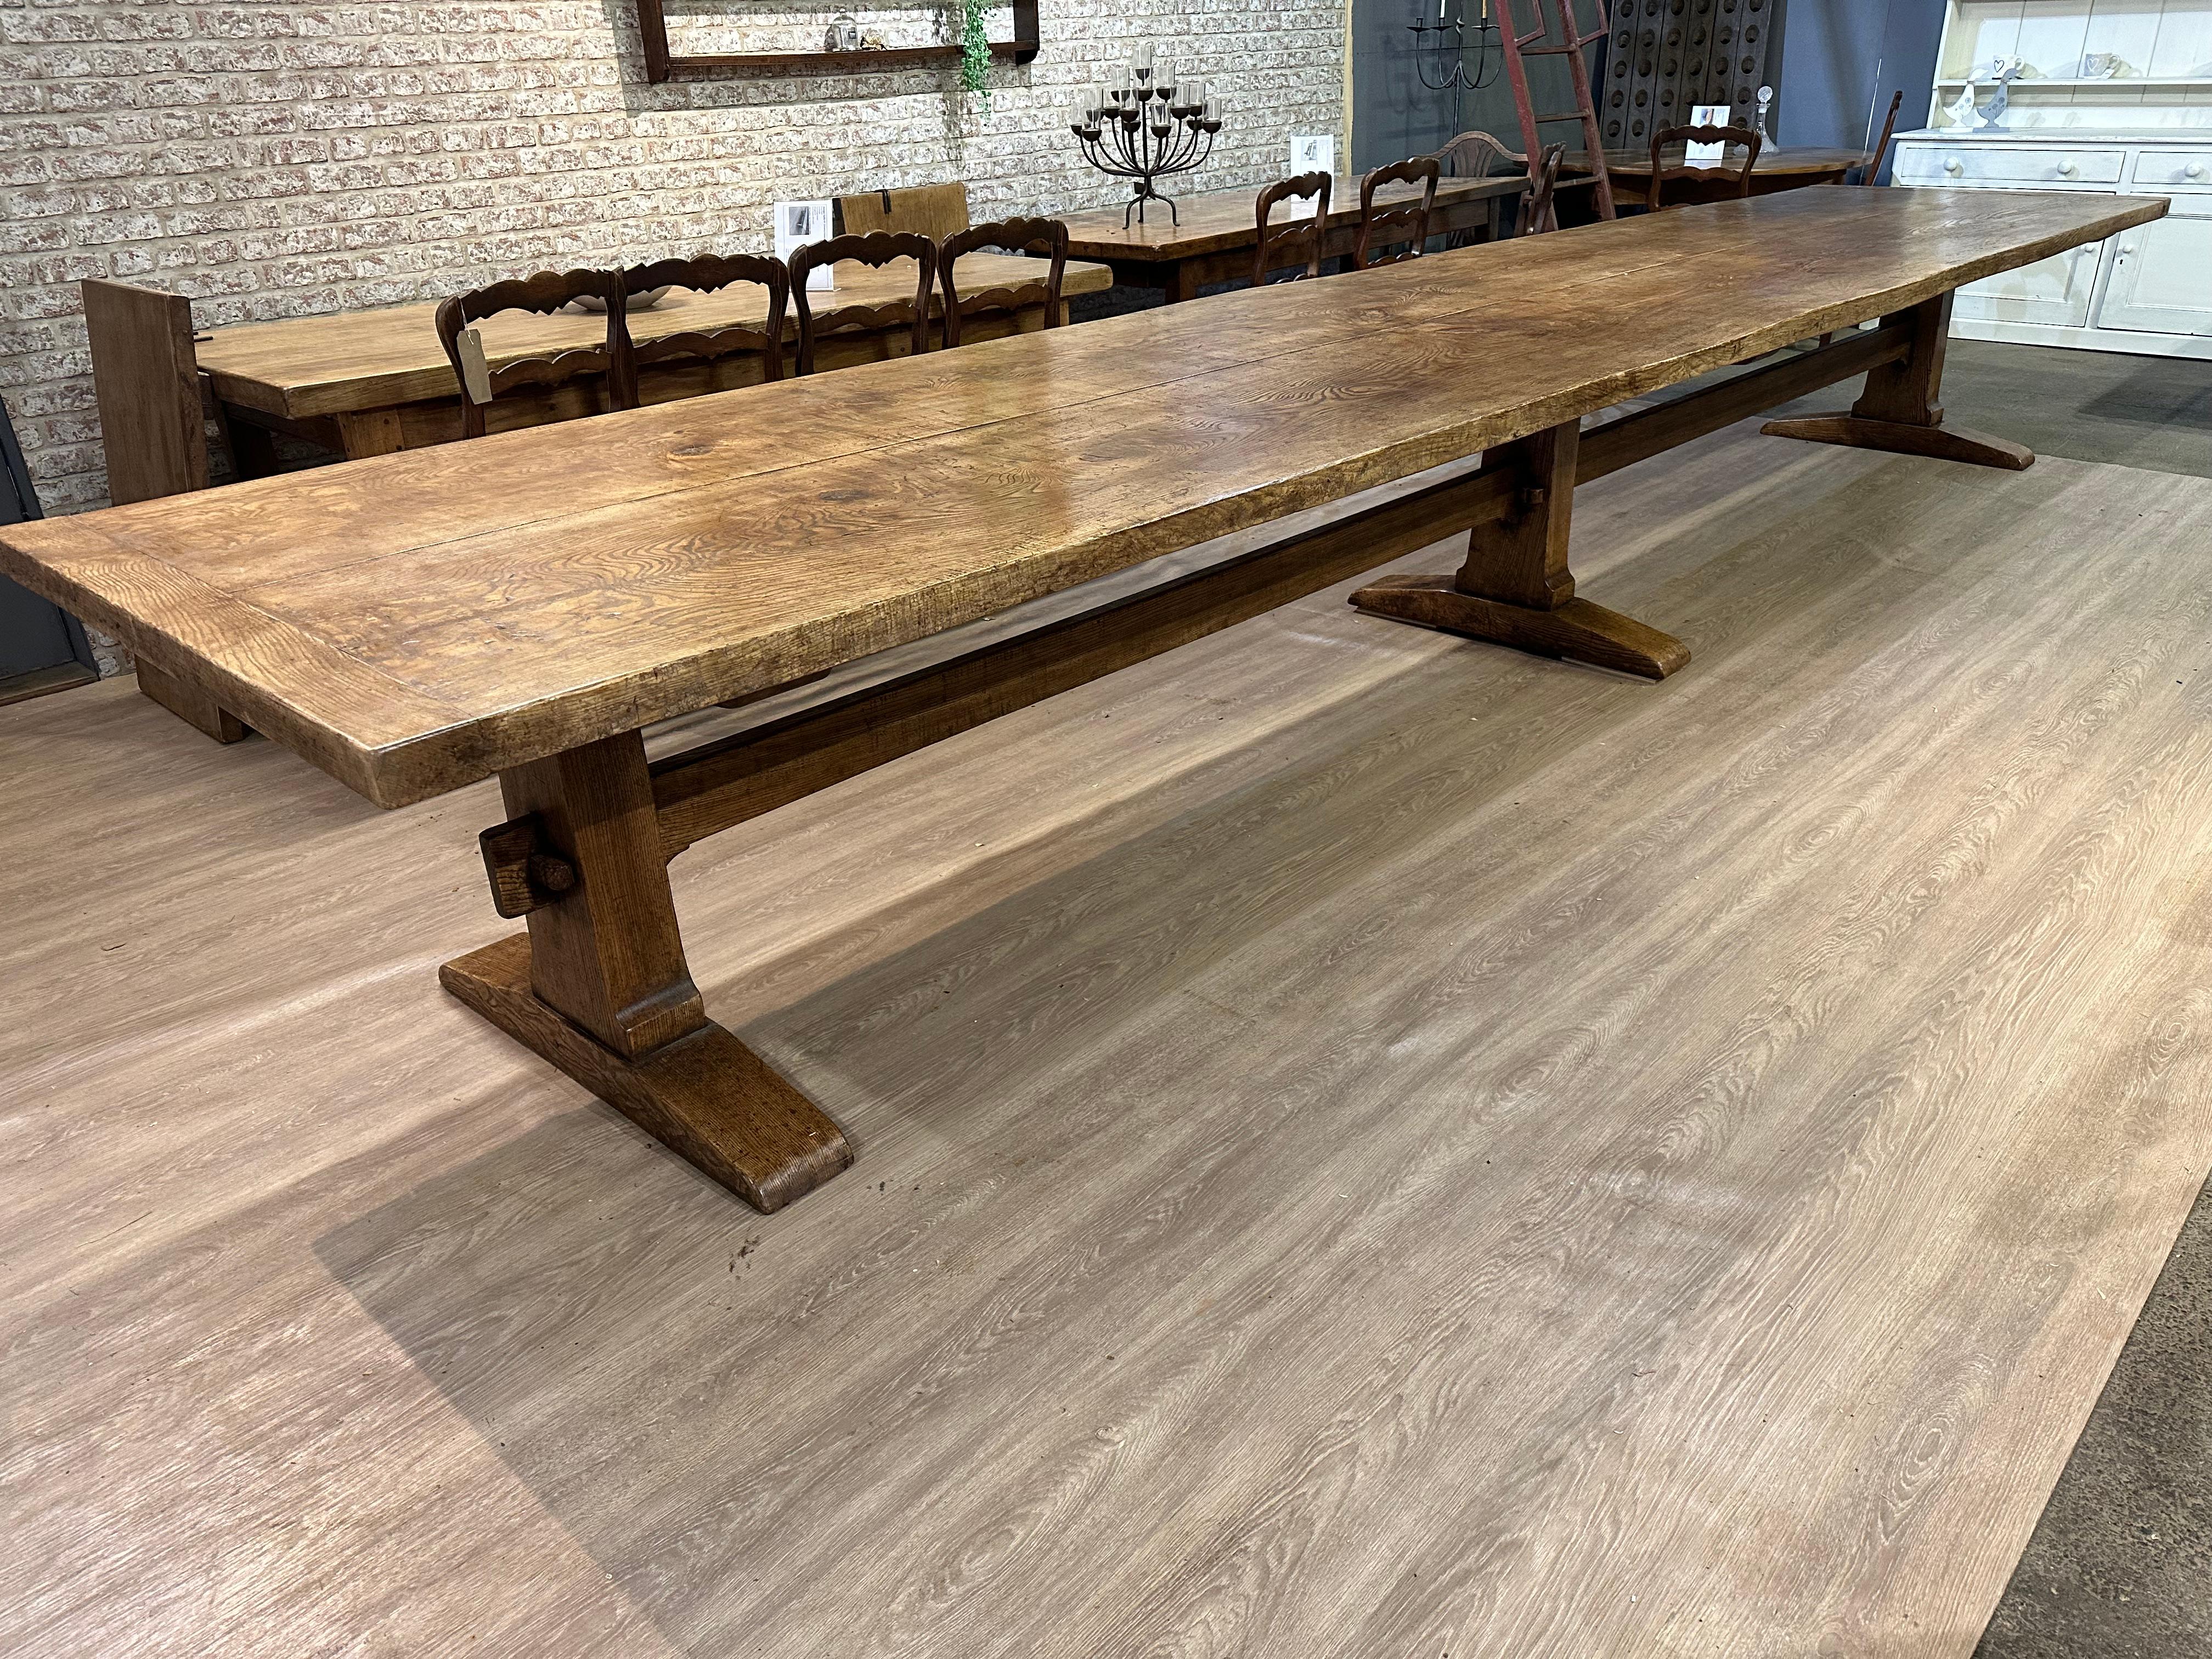 Magnificent figured ash two plank top refectory table. 17th-century style substantial three pillar table, constructed using a pair of booked matched planks, that have been pit sawn and hand-planed. The top is joined by cleated ends and five tenon